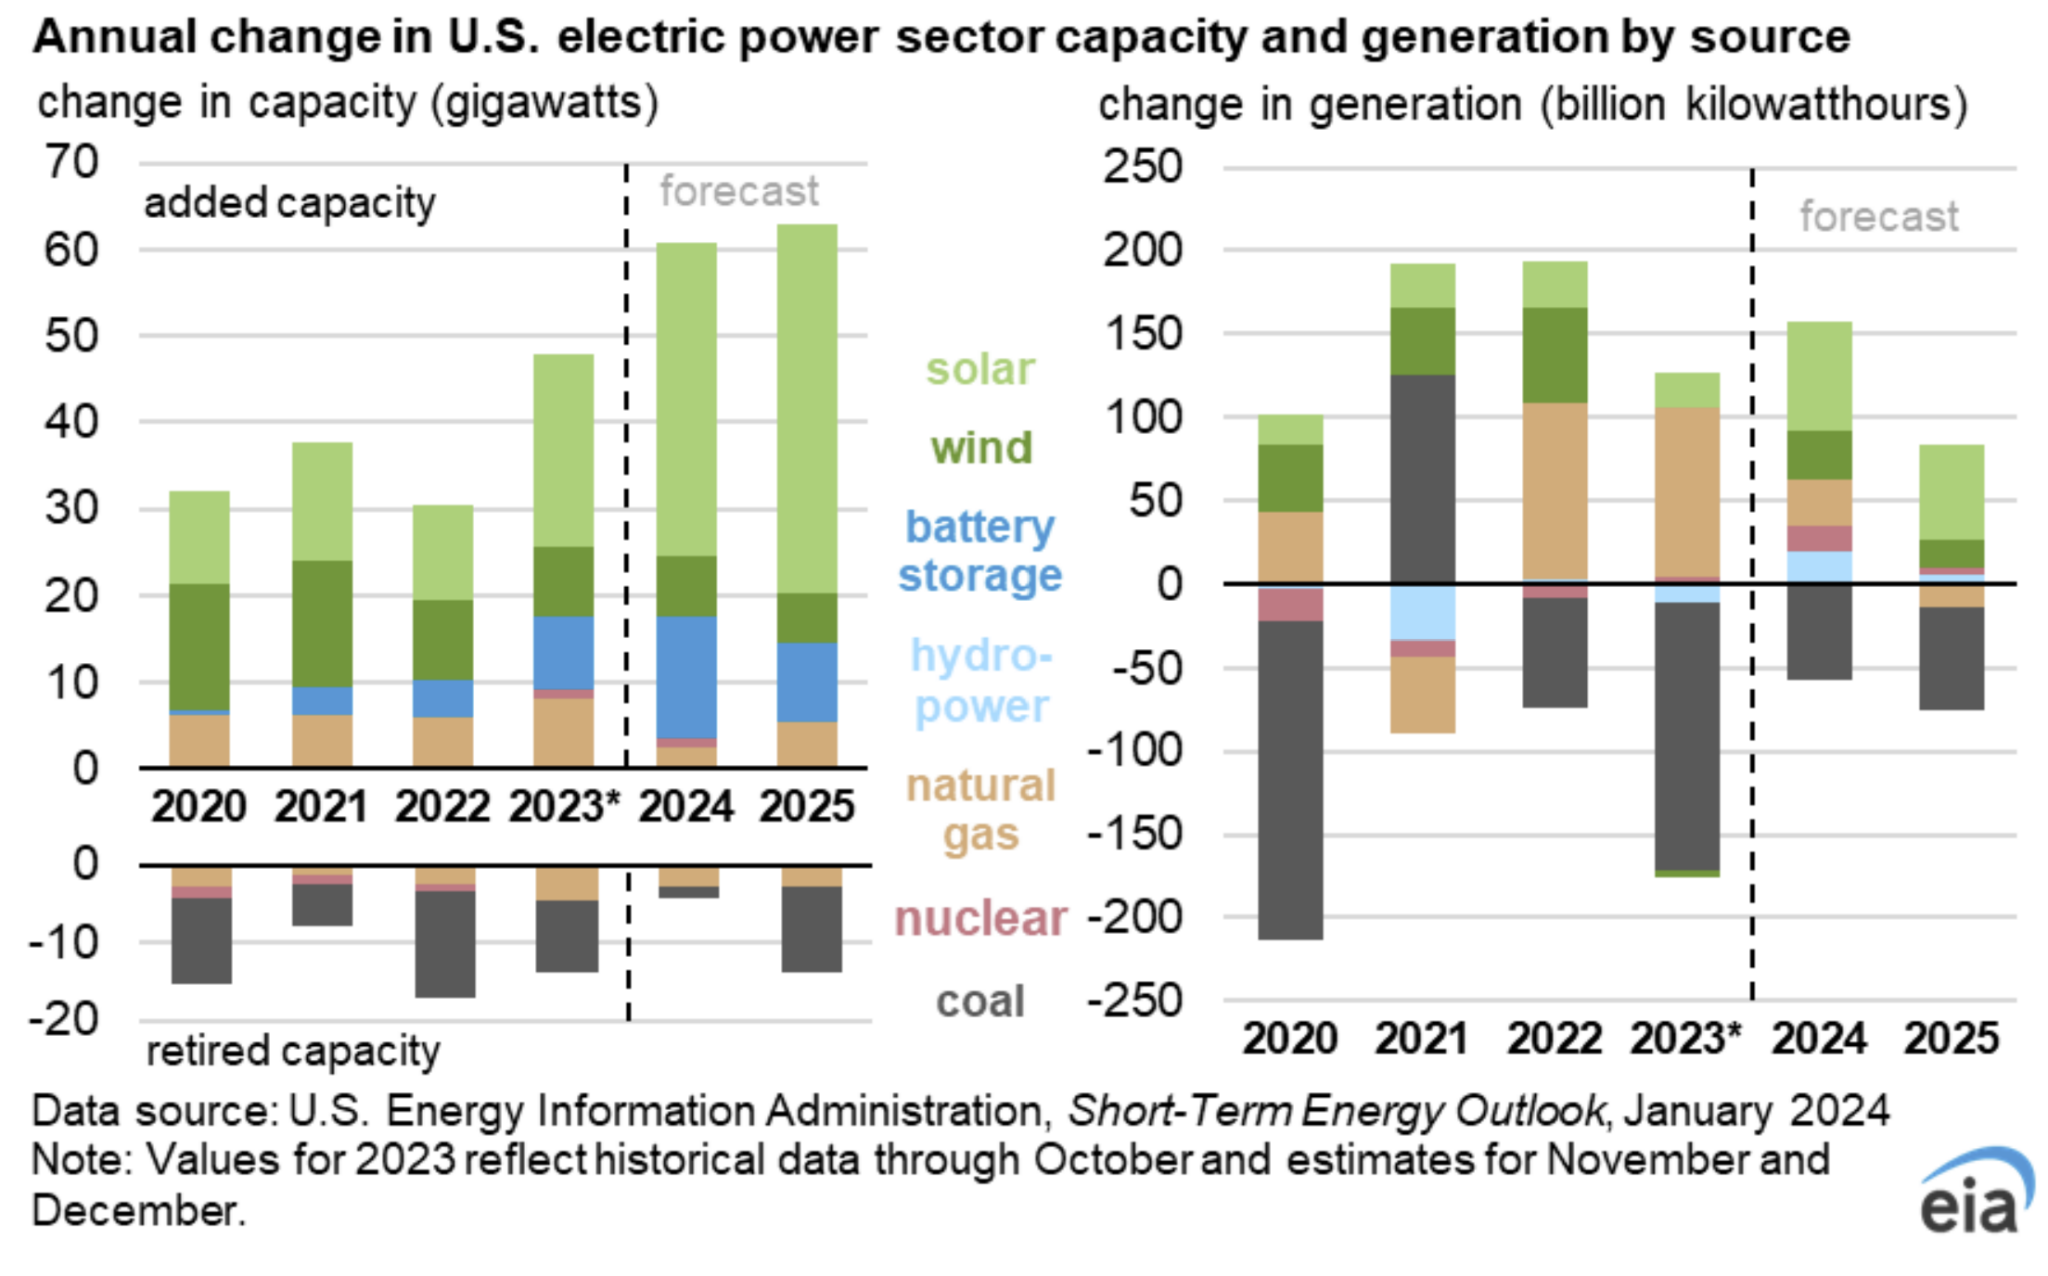 Annual change in U.S. electric power sector capacity and generation by source